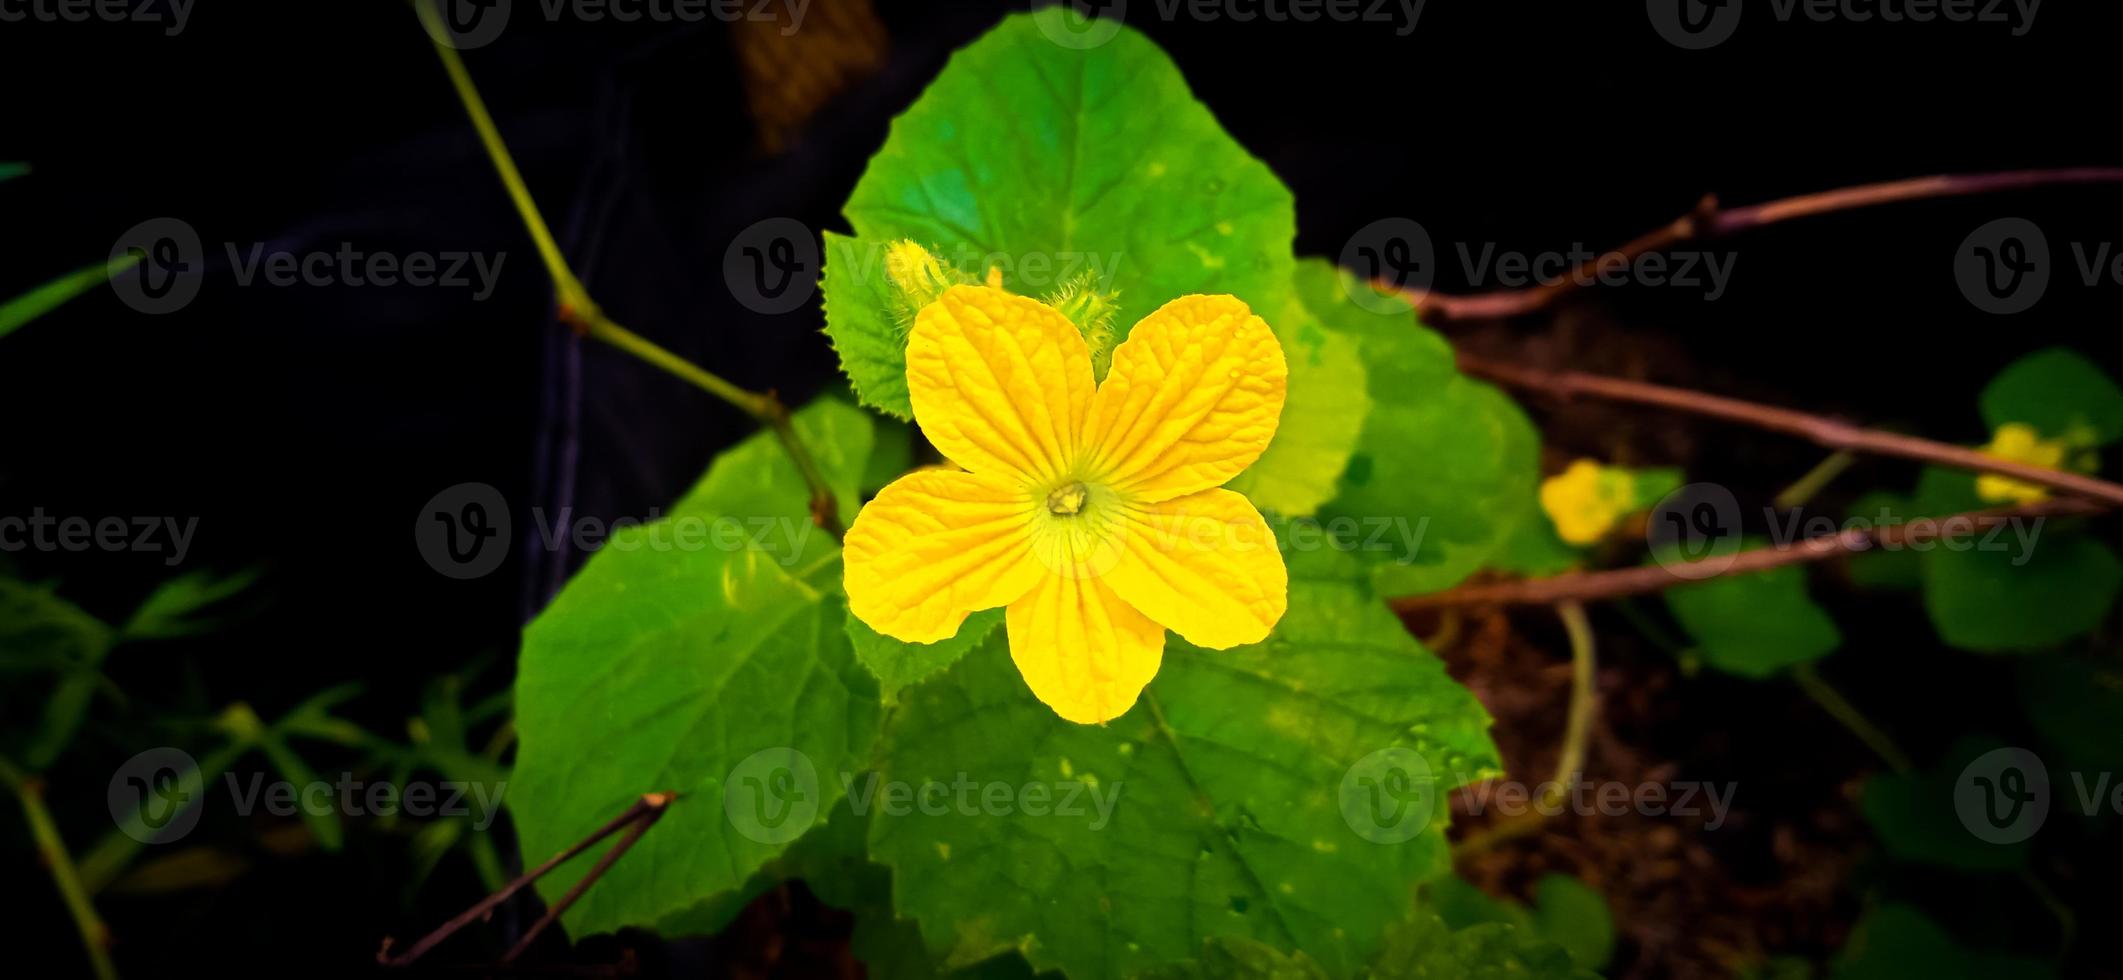 Green leaf and yellow flower of queen cucumber plant Cucumis melo, Cucurbitaceae family. photo